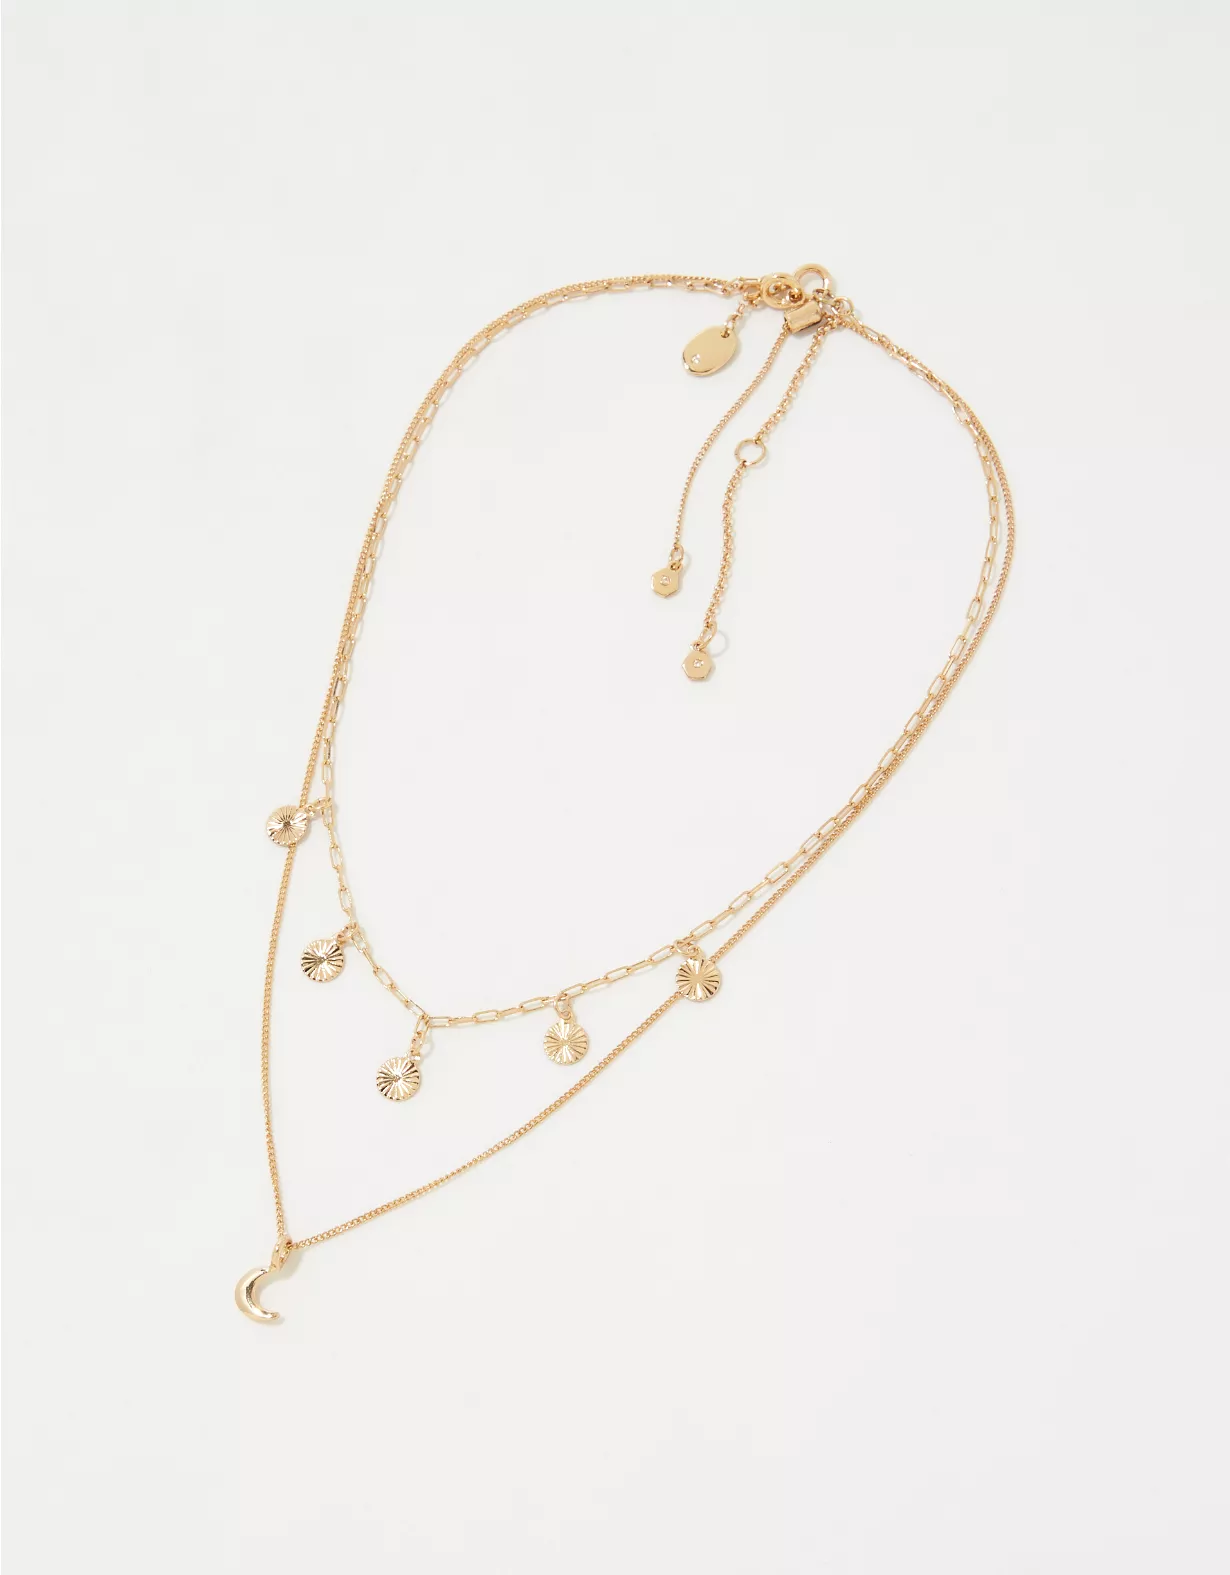 Aerie Moon Multi-Chain Necklace